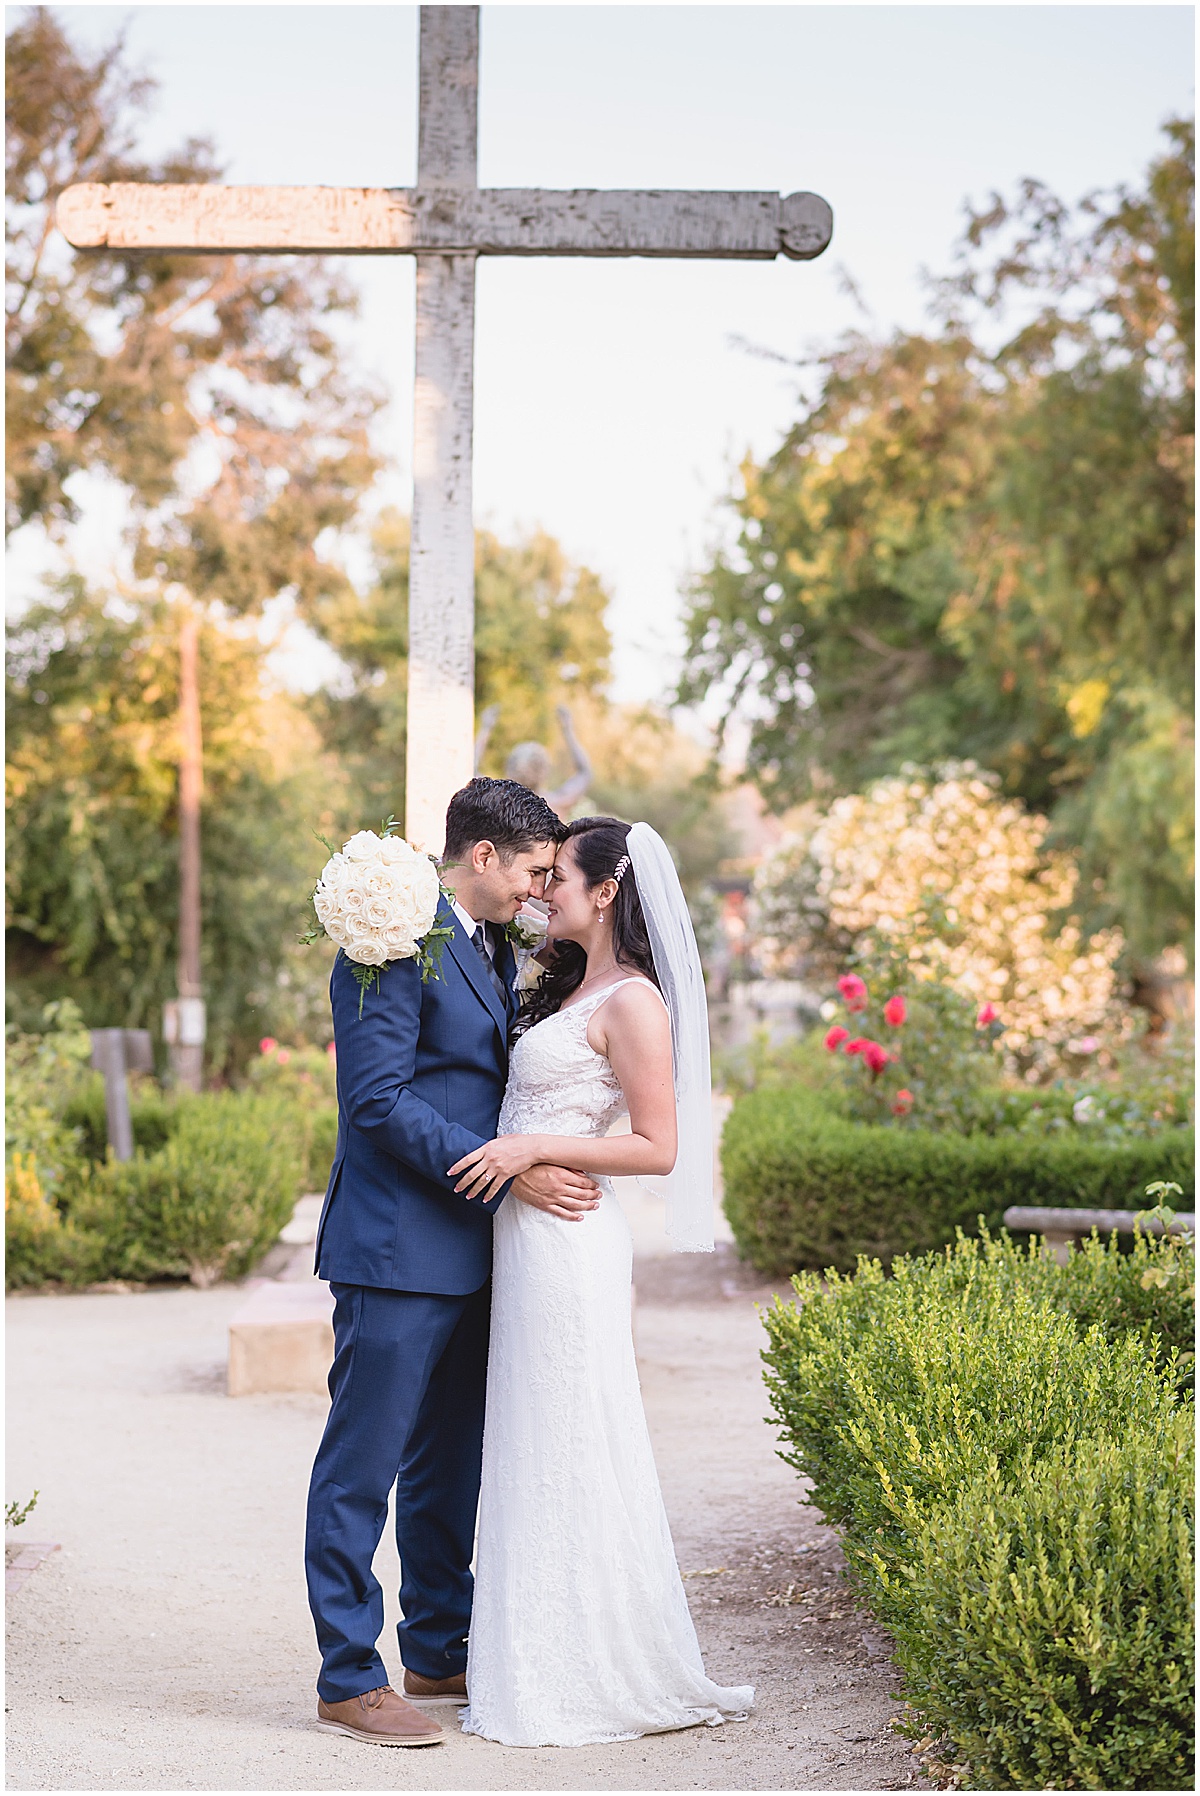 Intimate Hollister Backyard Wedding in Front of the Family Tree | Monelle + Joshua_0107